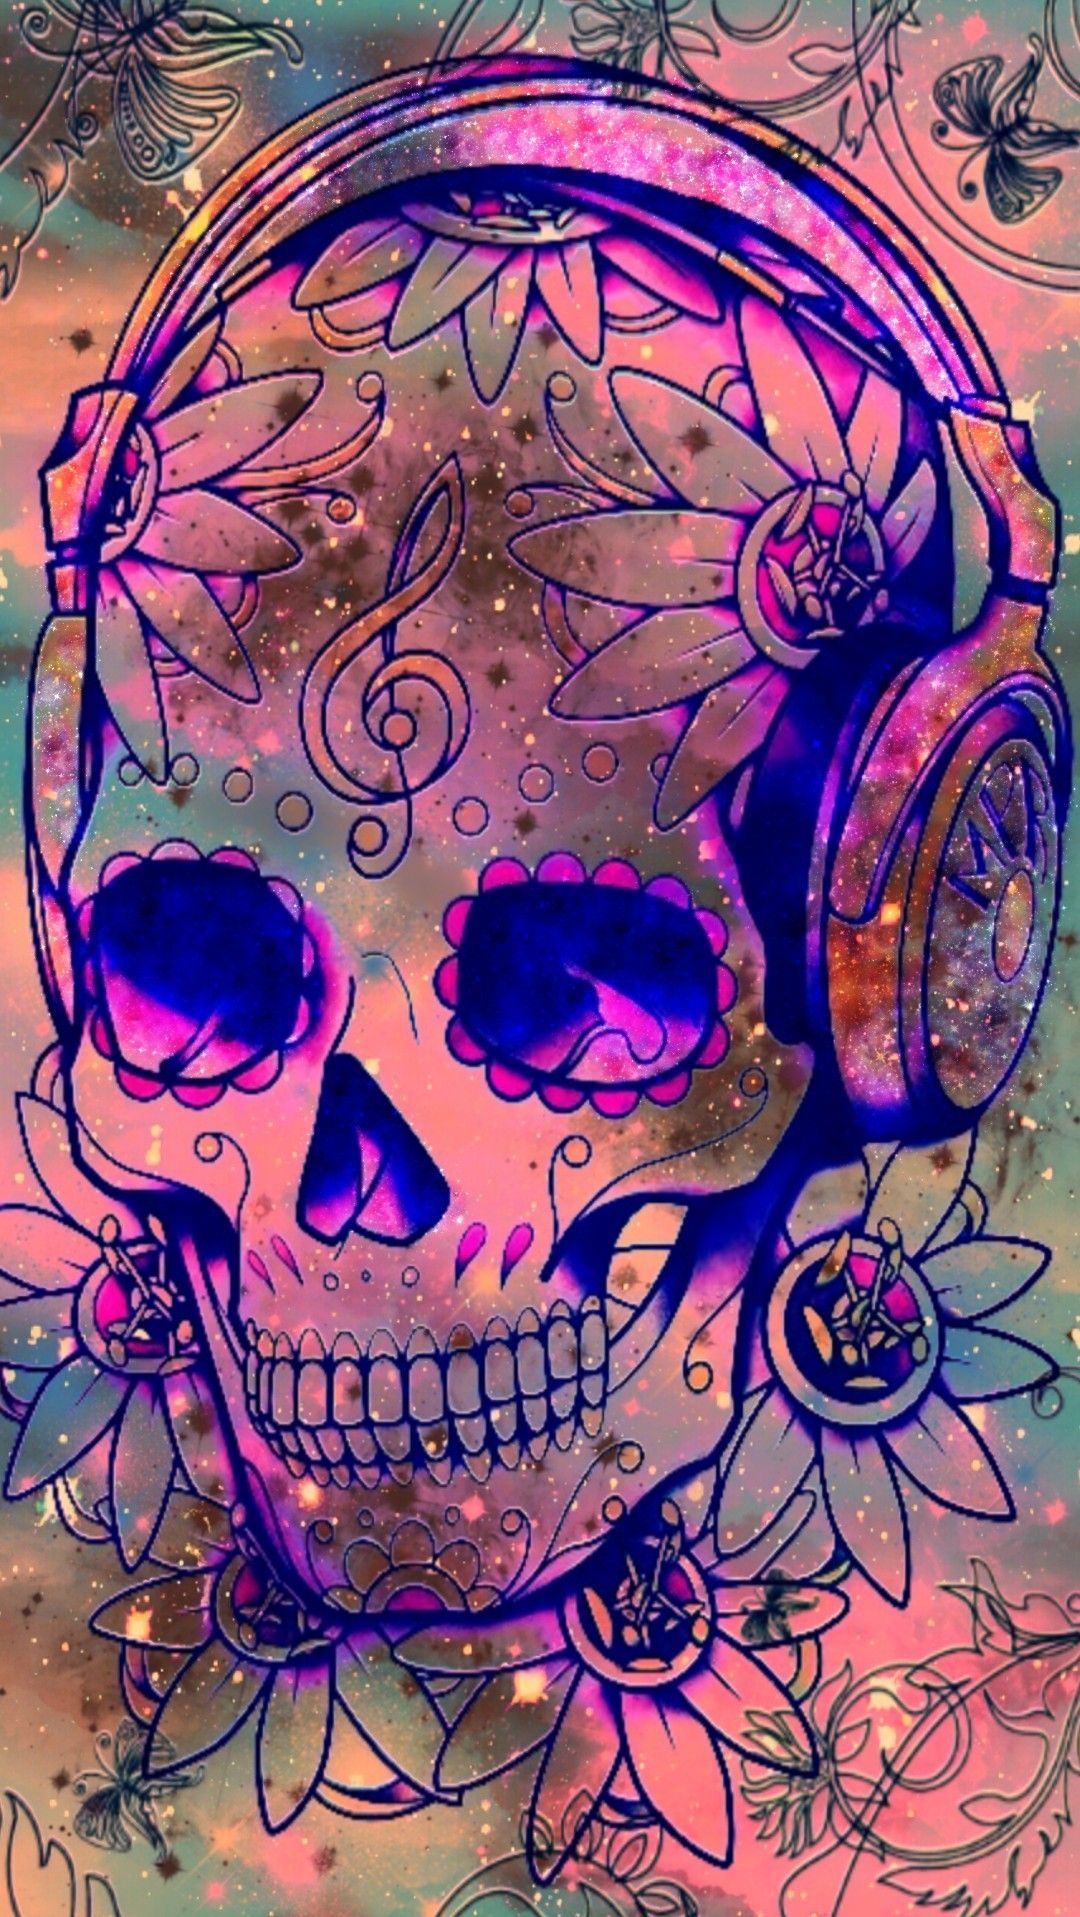 Retro Skull Galaxy, made by me #purple #sparkly #wallpaper #background #sparkles #glittery #galaxy #art #abstract #skulls #m. Skull wallpaper, Background s, Art